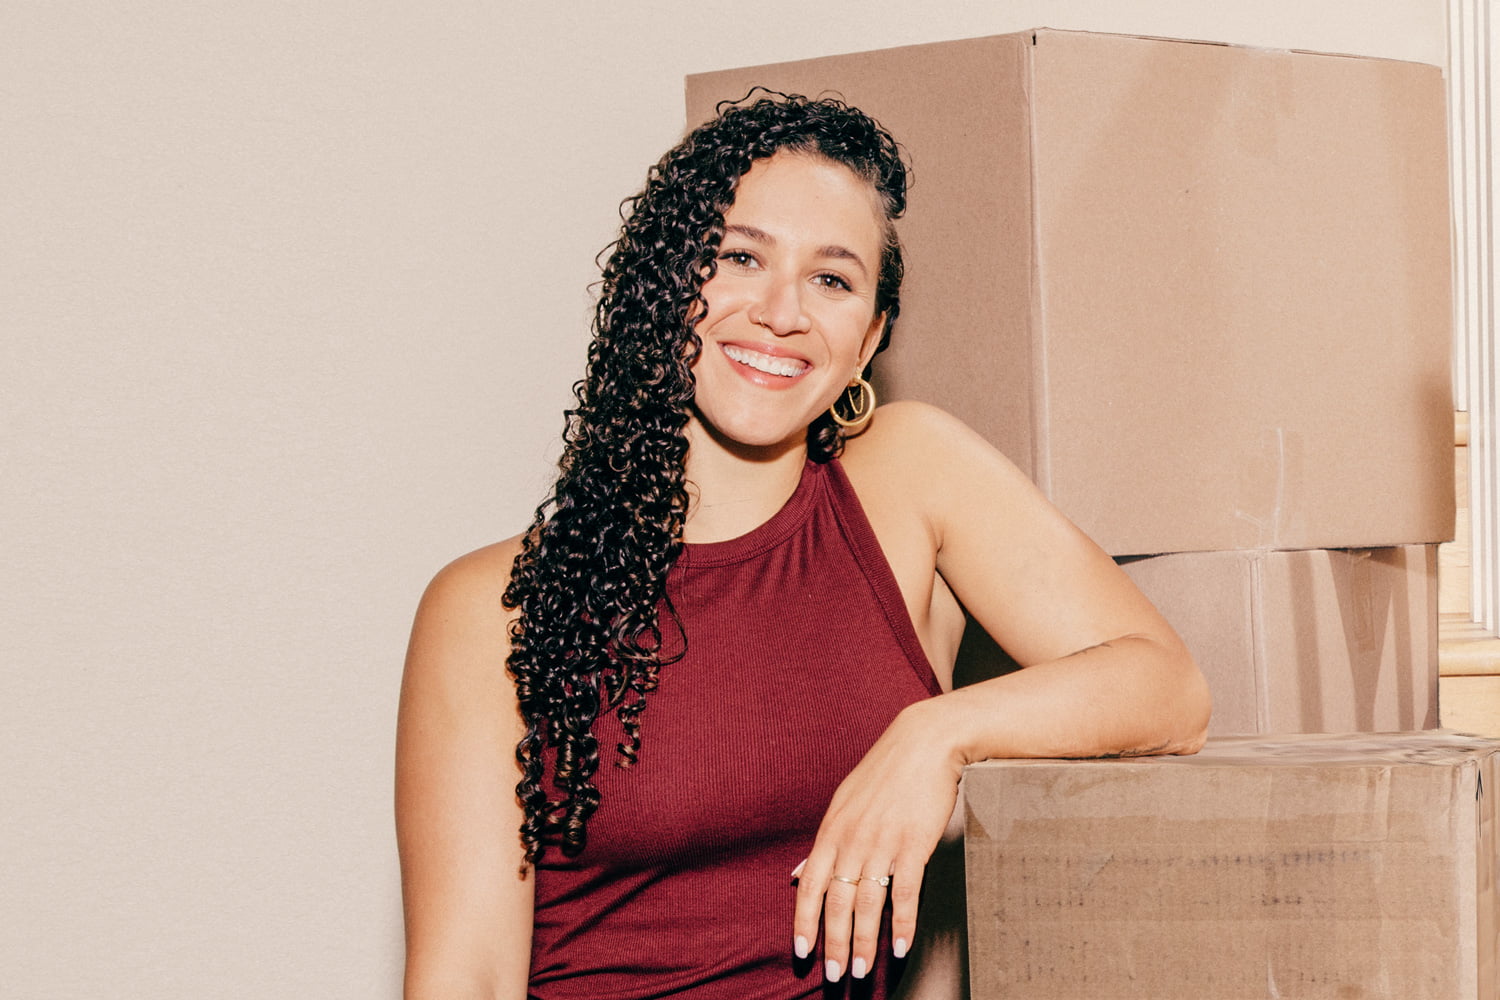 A smiling young lady is in front of moving packing boxes in her new home,